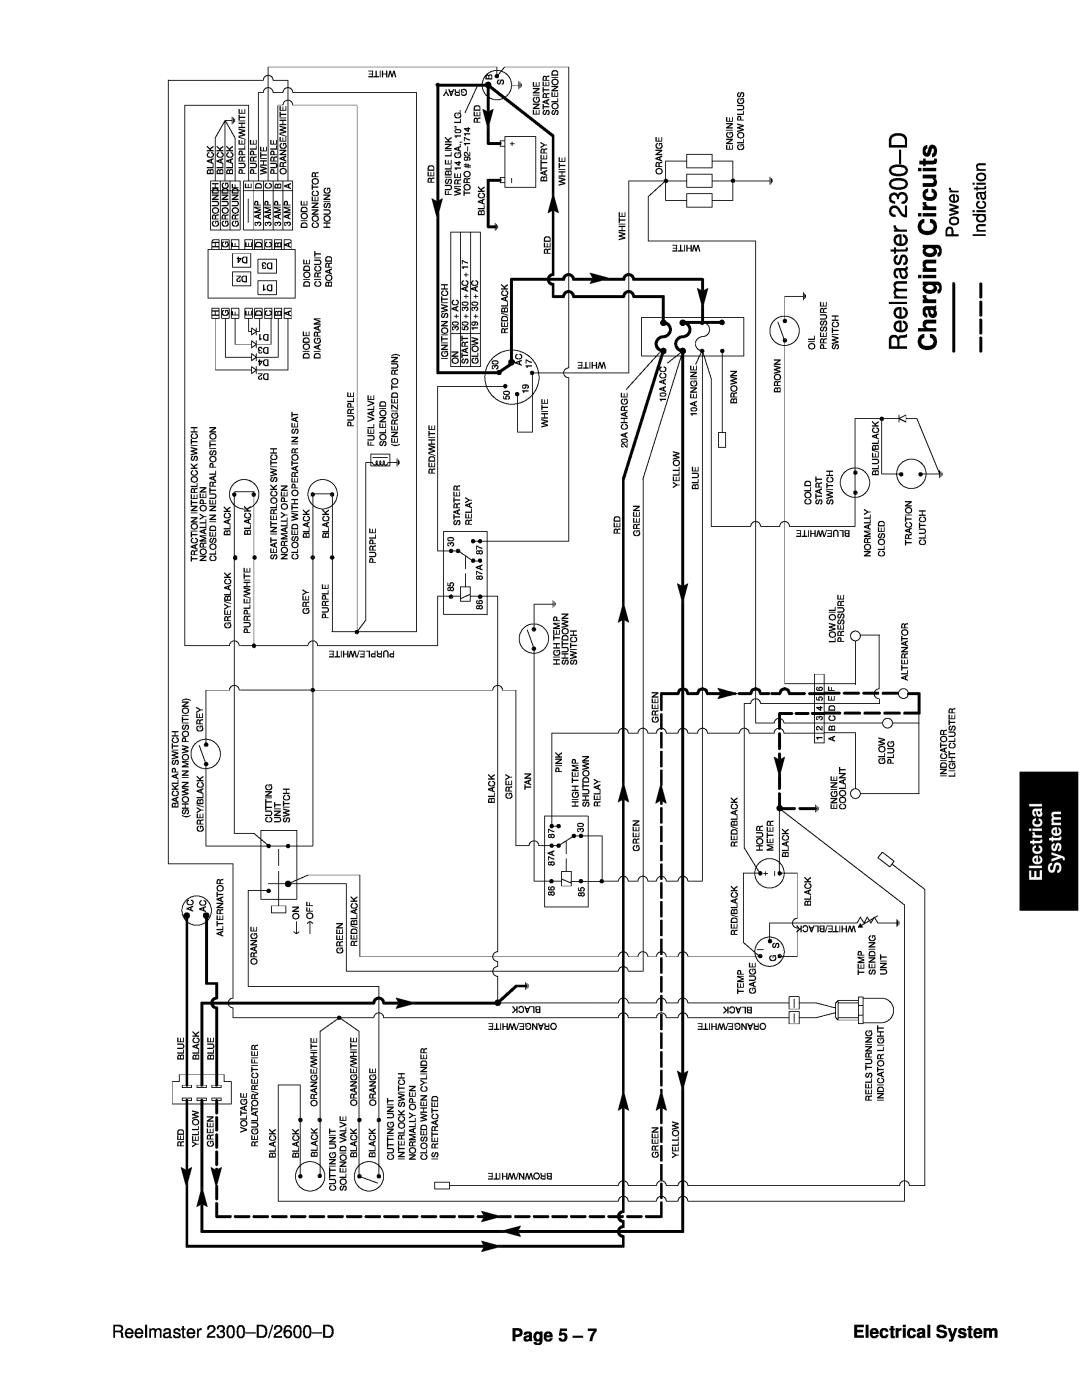 Toro 2600D, 2300-D service manual Charging Circuits, Reelmaster 2300±D, Page 5 ±, Electrical System 